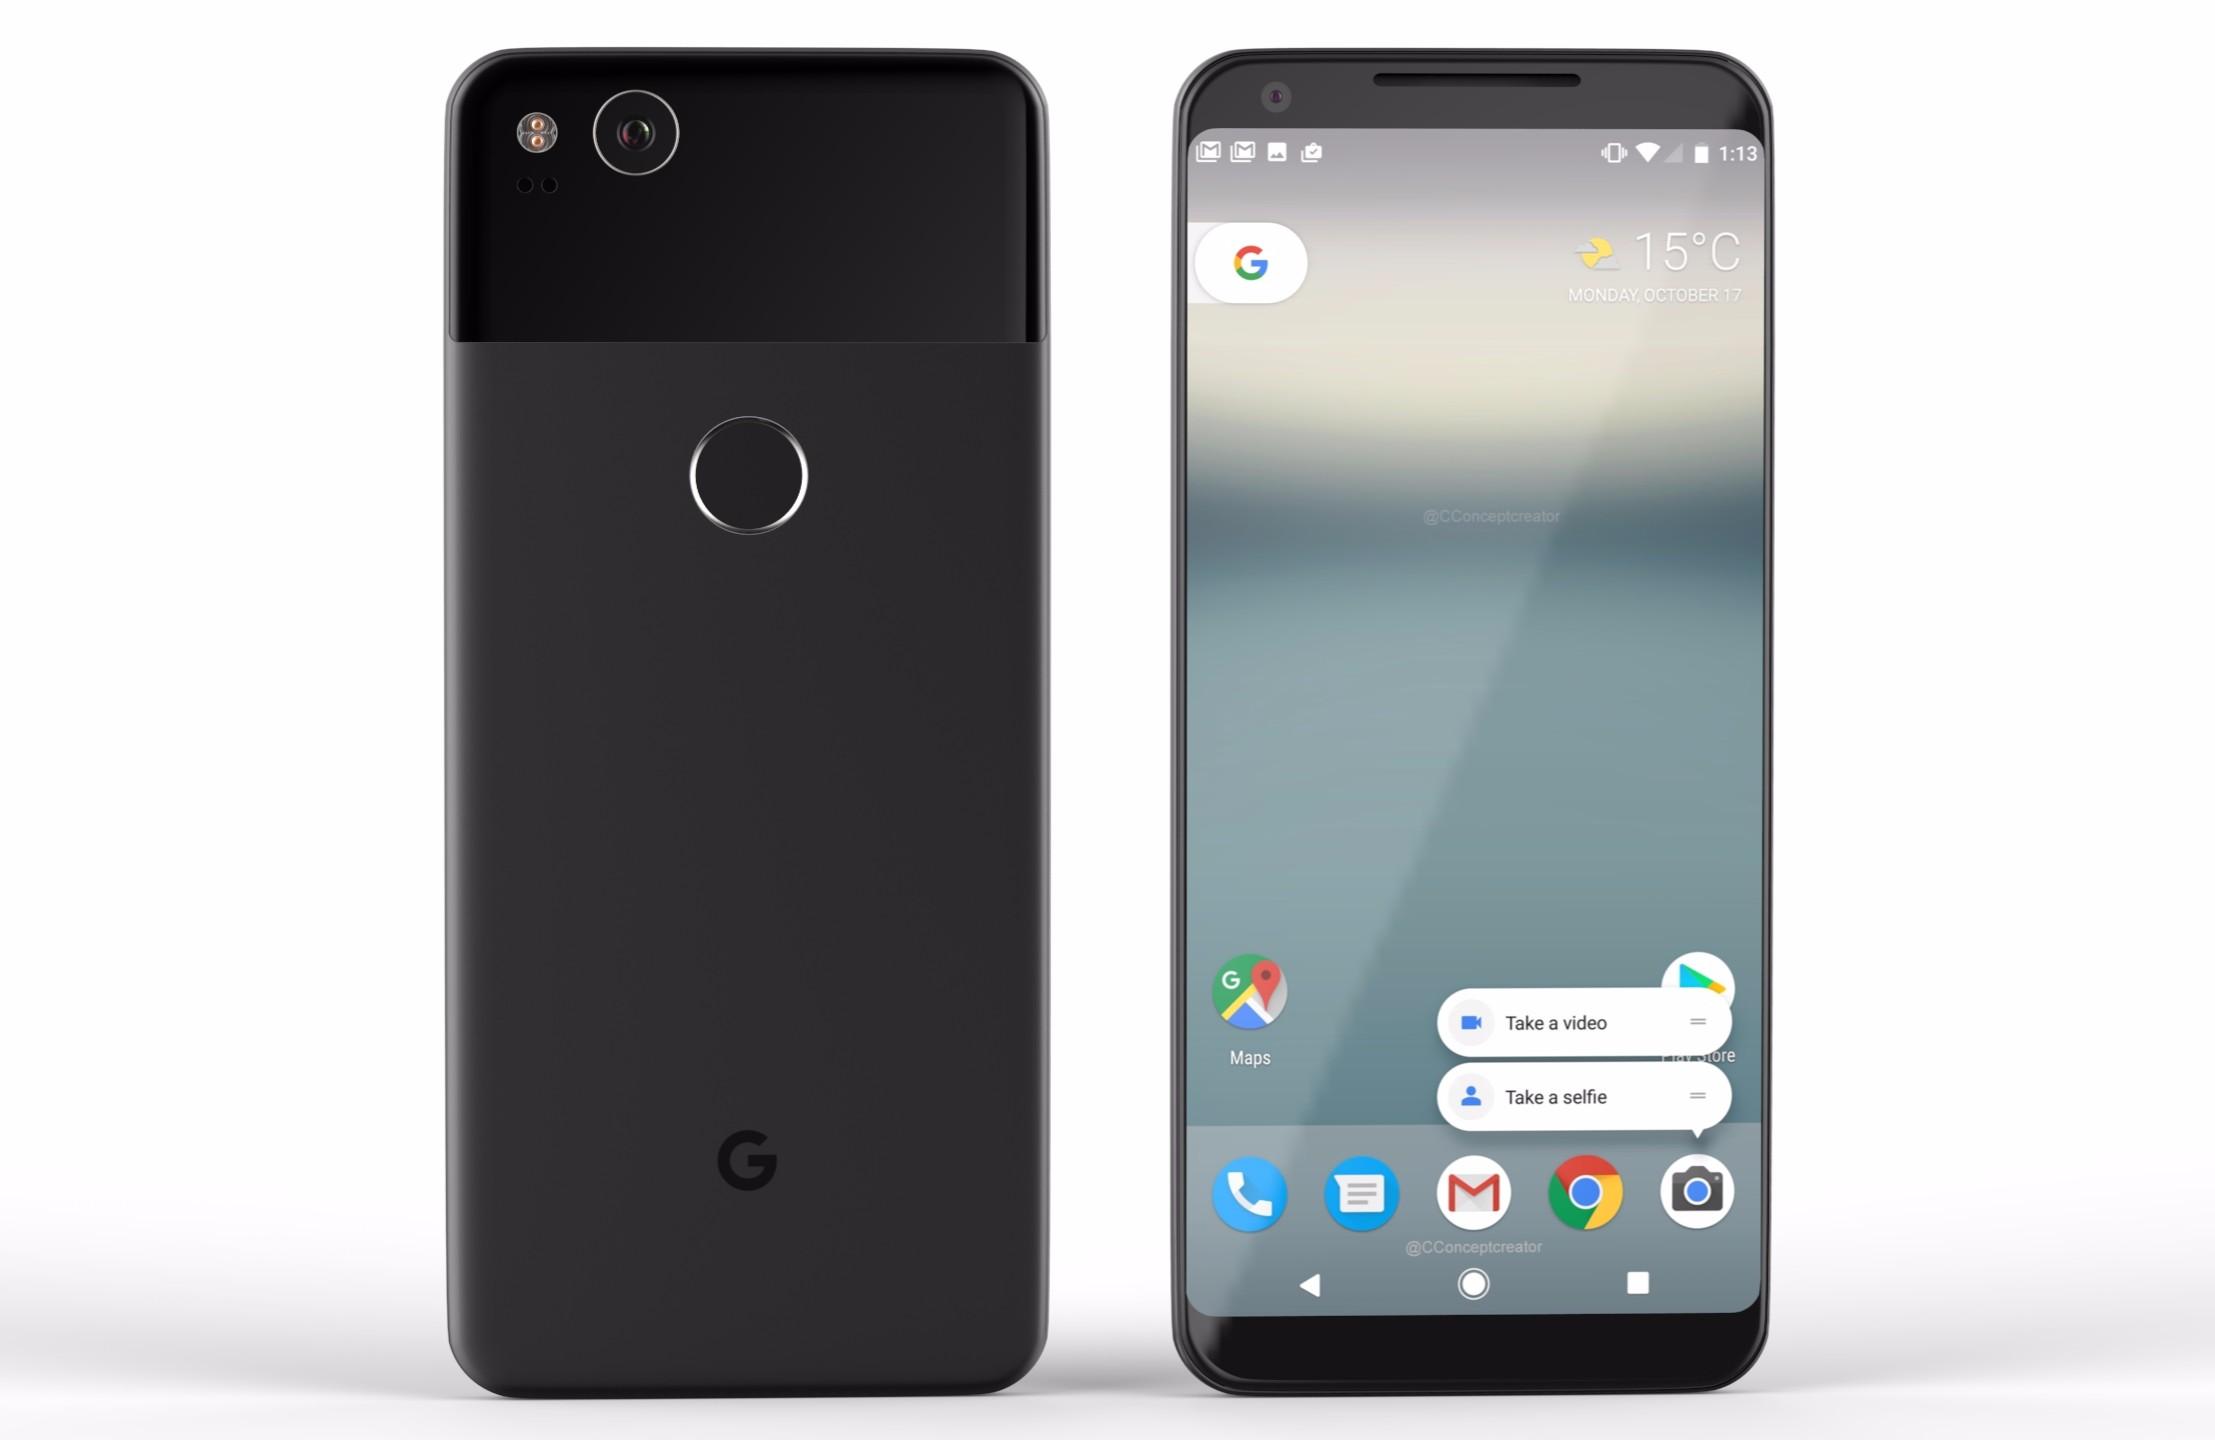 Snapdragon 836 rumored for Pixel 2 might be vaporware